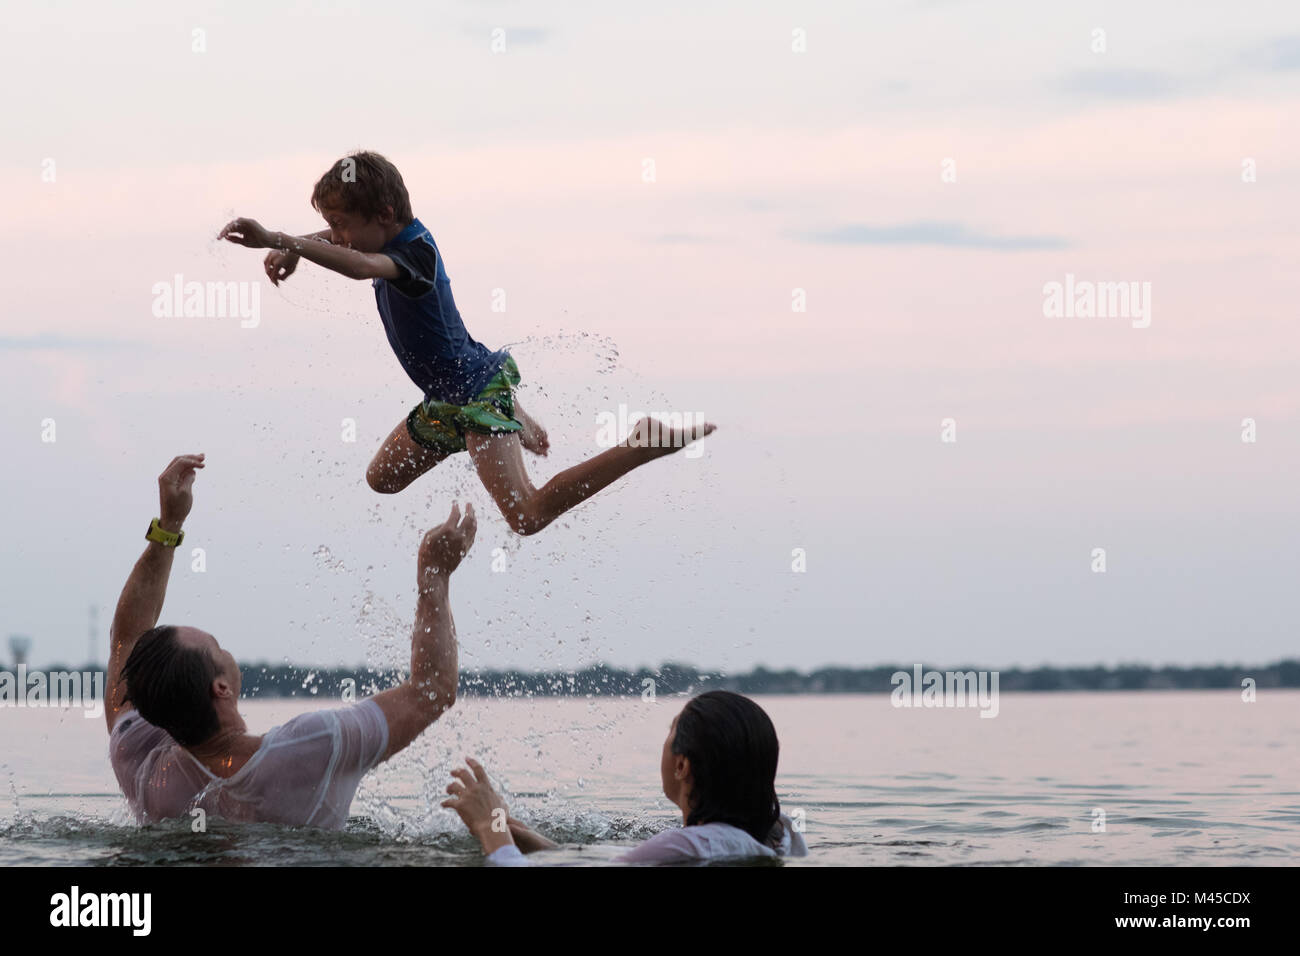 Clothed parents in water throwing son in mid air, Destin, Florida, United States, North America Stock Photo